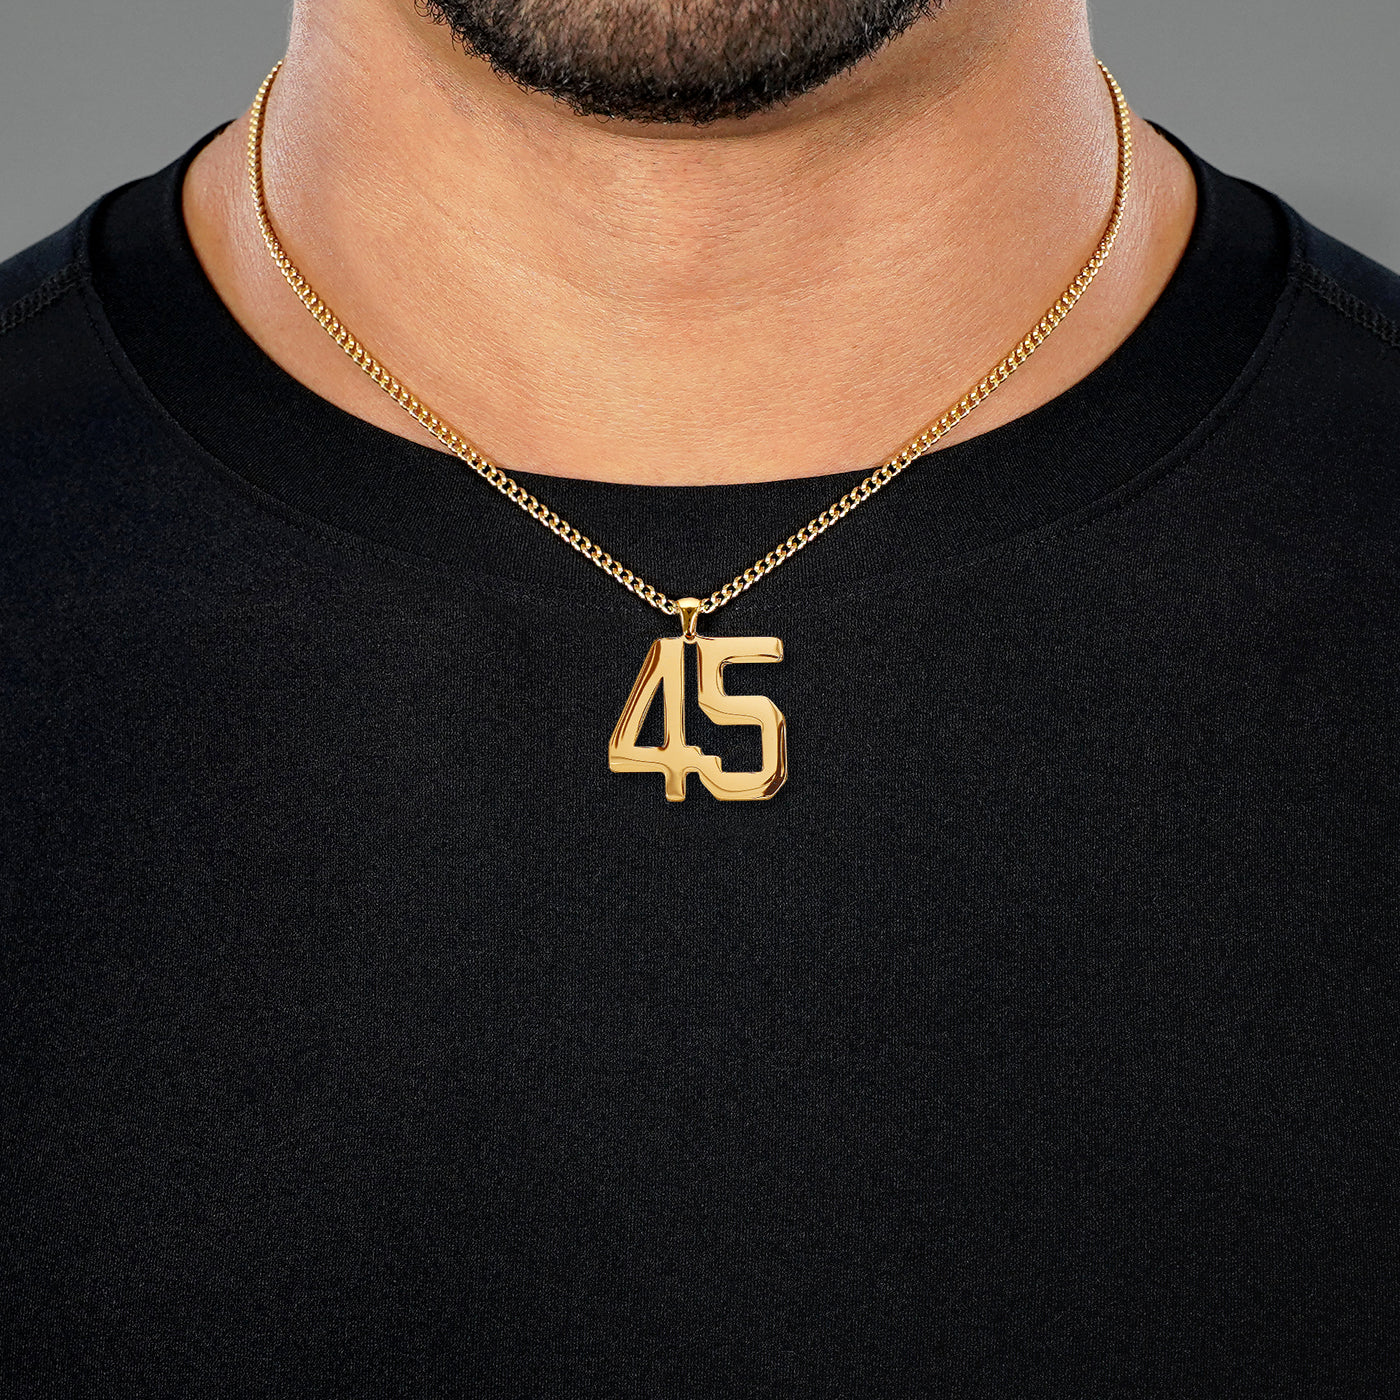 45 Number Pendant with Chain Necklace - Gold Plated Stainless Steel